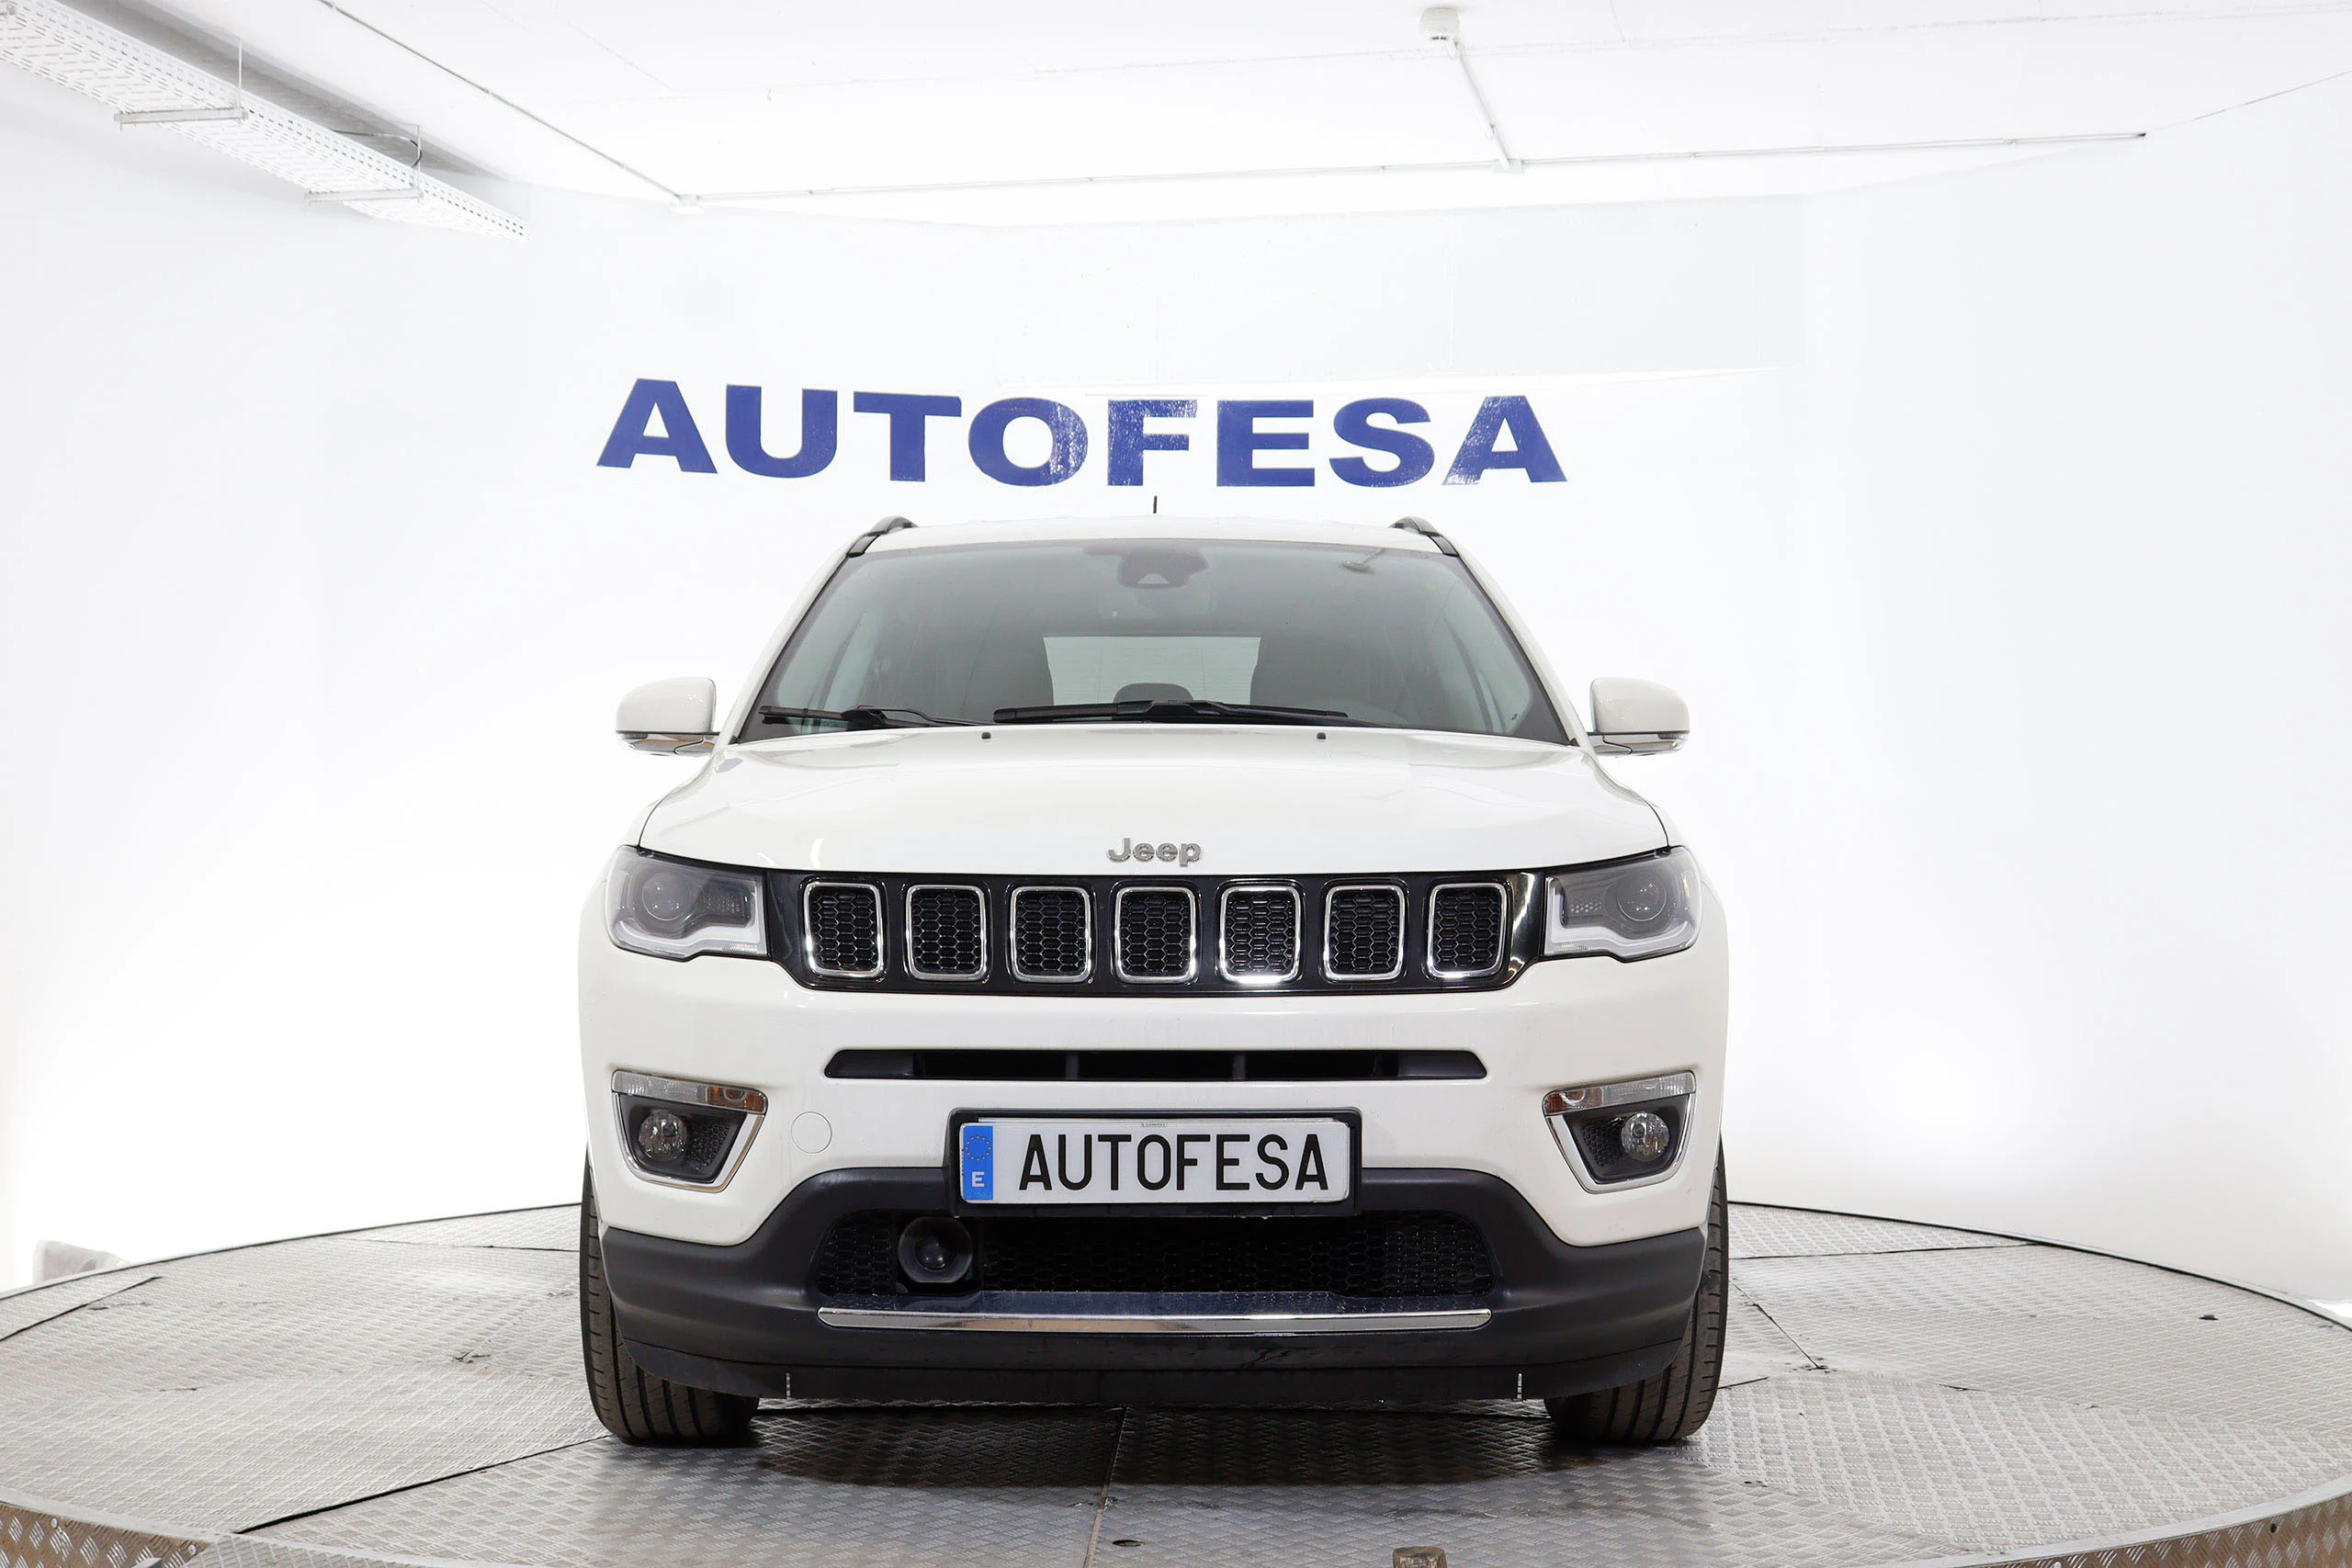 Jeep Compass 2.0 Limited 4X4 170cv Auto 5P S/S # IVA DEDUCIBLE, NAVY, FAROS LED, PARKTRONIC - Foto 2